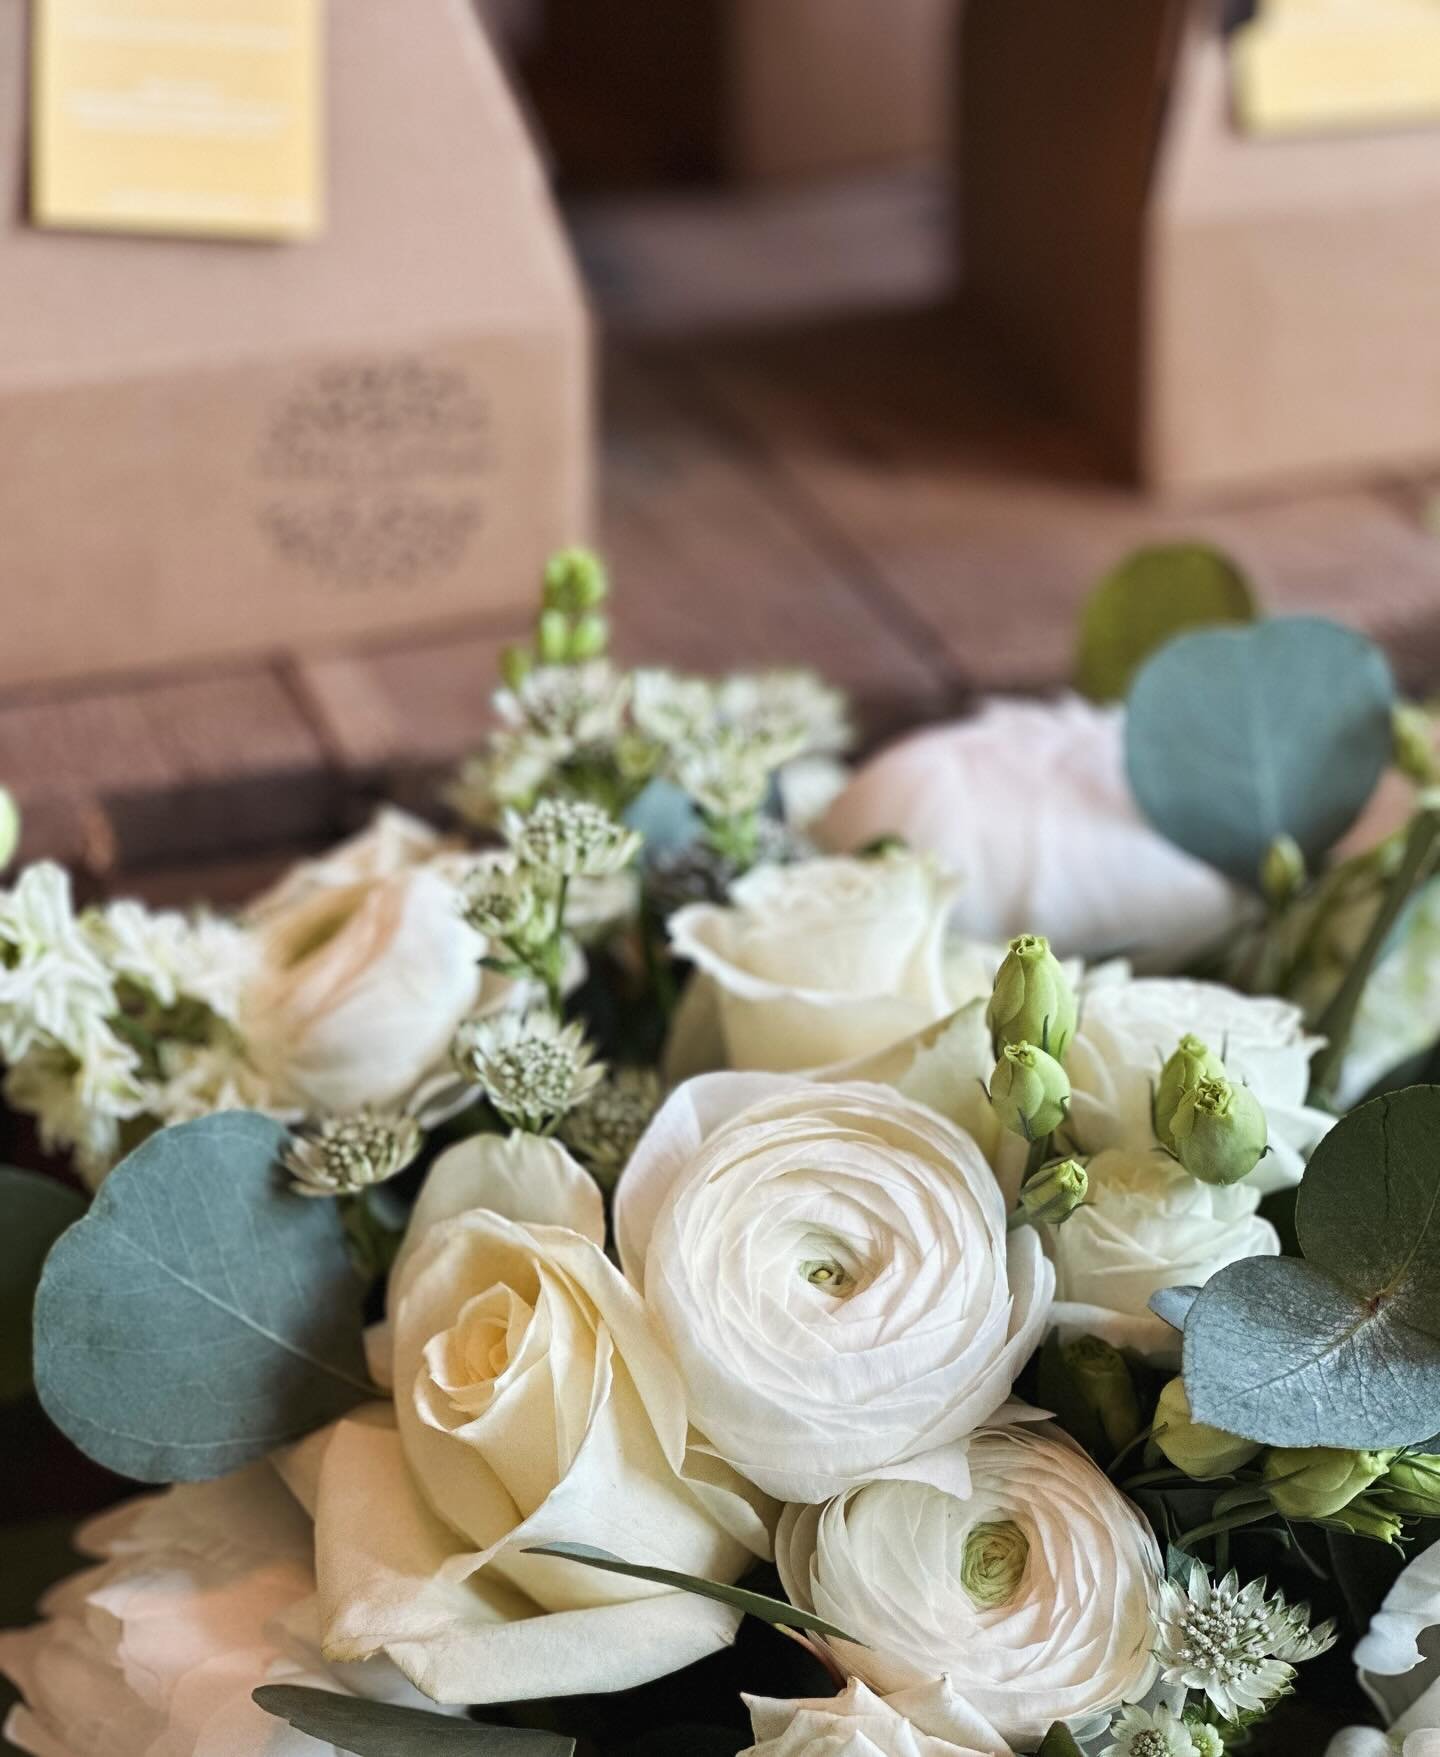 🤍OUT OF OFFICE🤍

We hope you have a fantastic bank holiday weekend 🫶 

We will be back Tuesday as normal with a fresh delivery of beautiful bloom ready for you lovely lot 😘